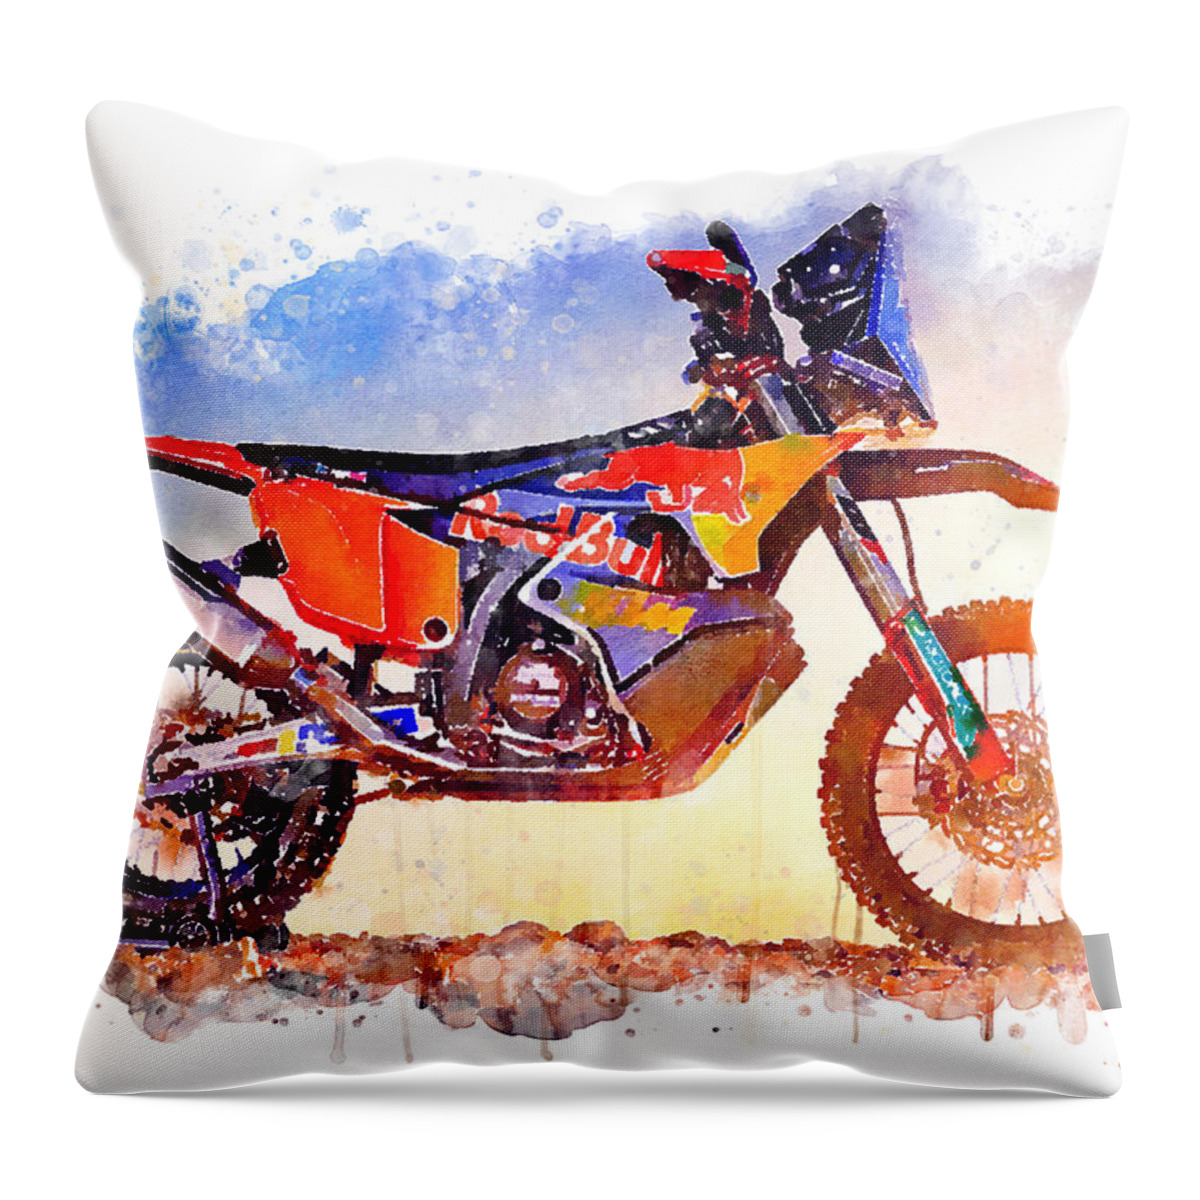 Adventure Throw Pillow featuring the painting Watercolor KTM 450 Rally Dakar motorcycle - oryginal artwork by Vart. by Vart Studio